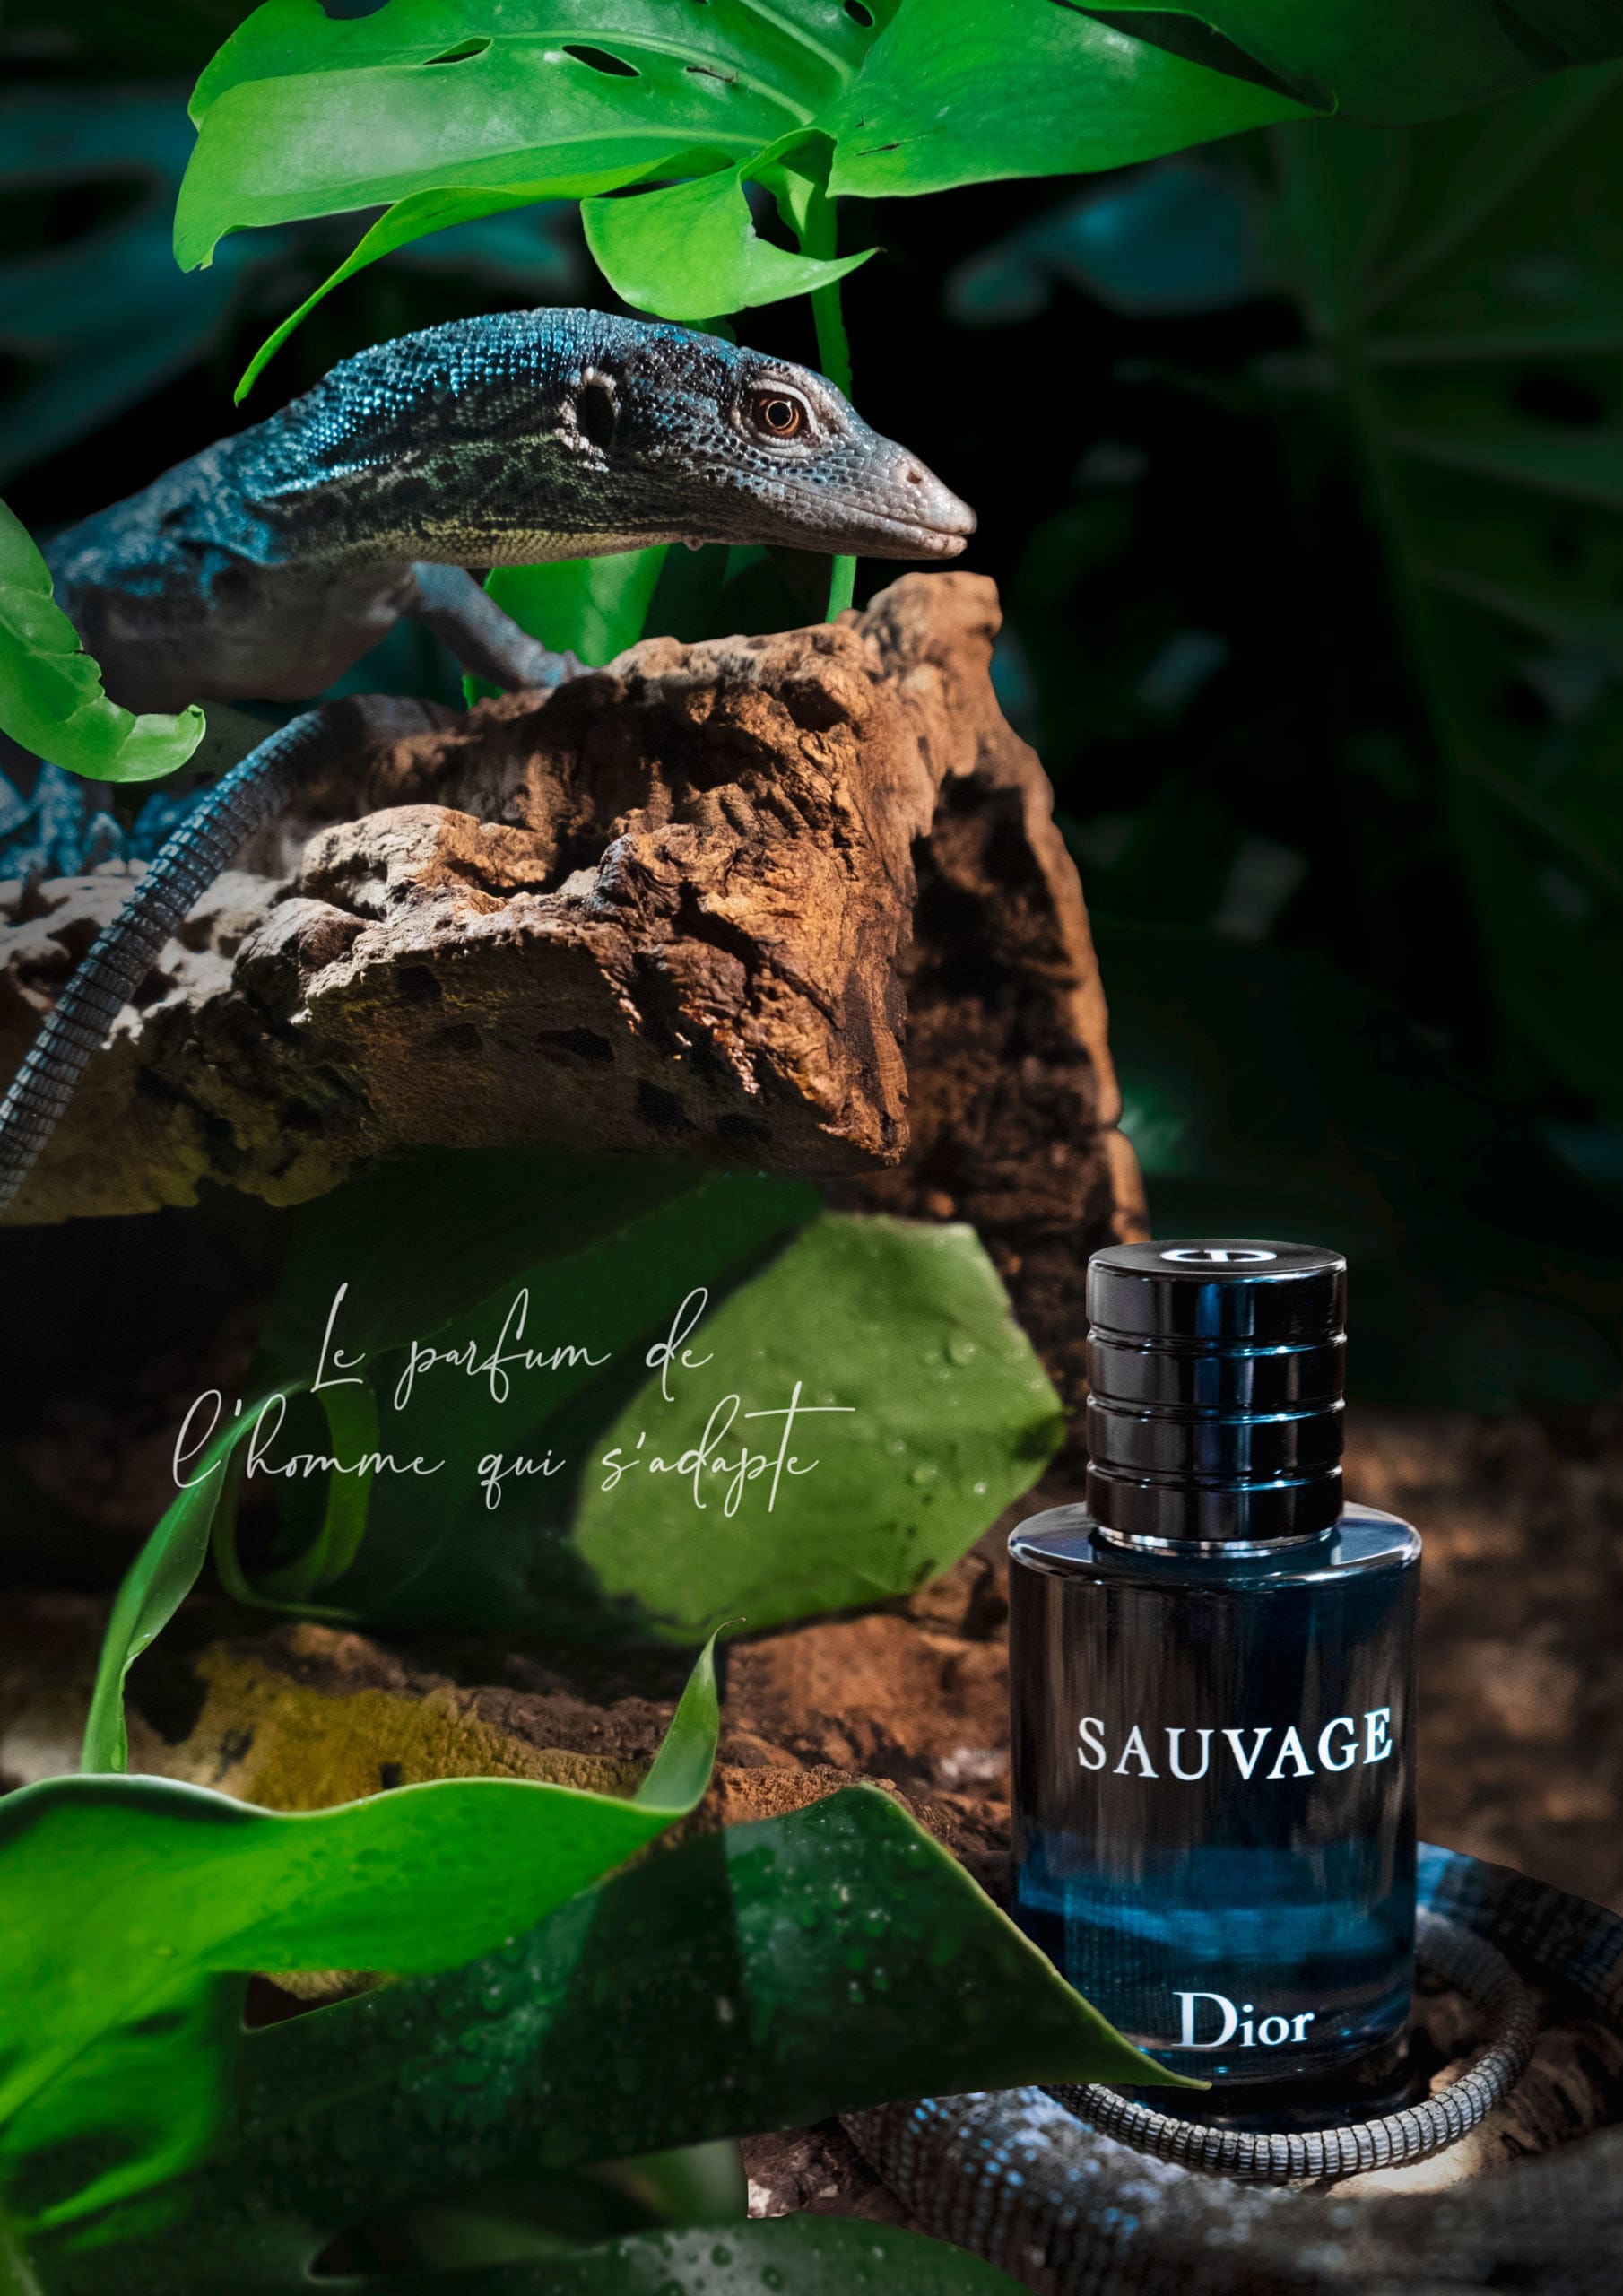 Dior_Sauvage_Poster_Vertical